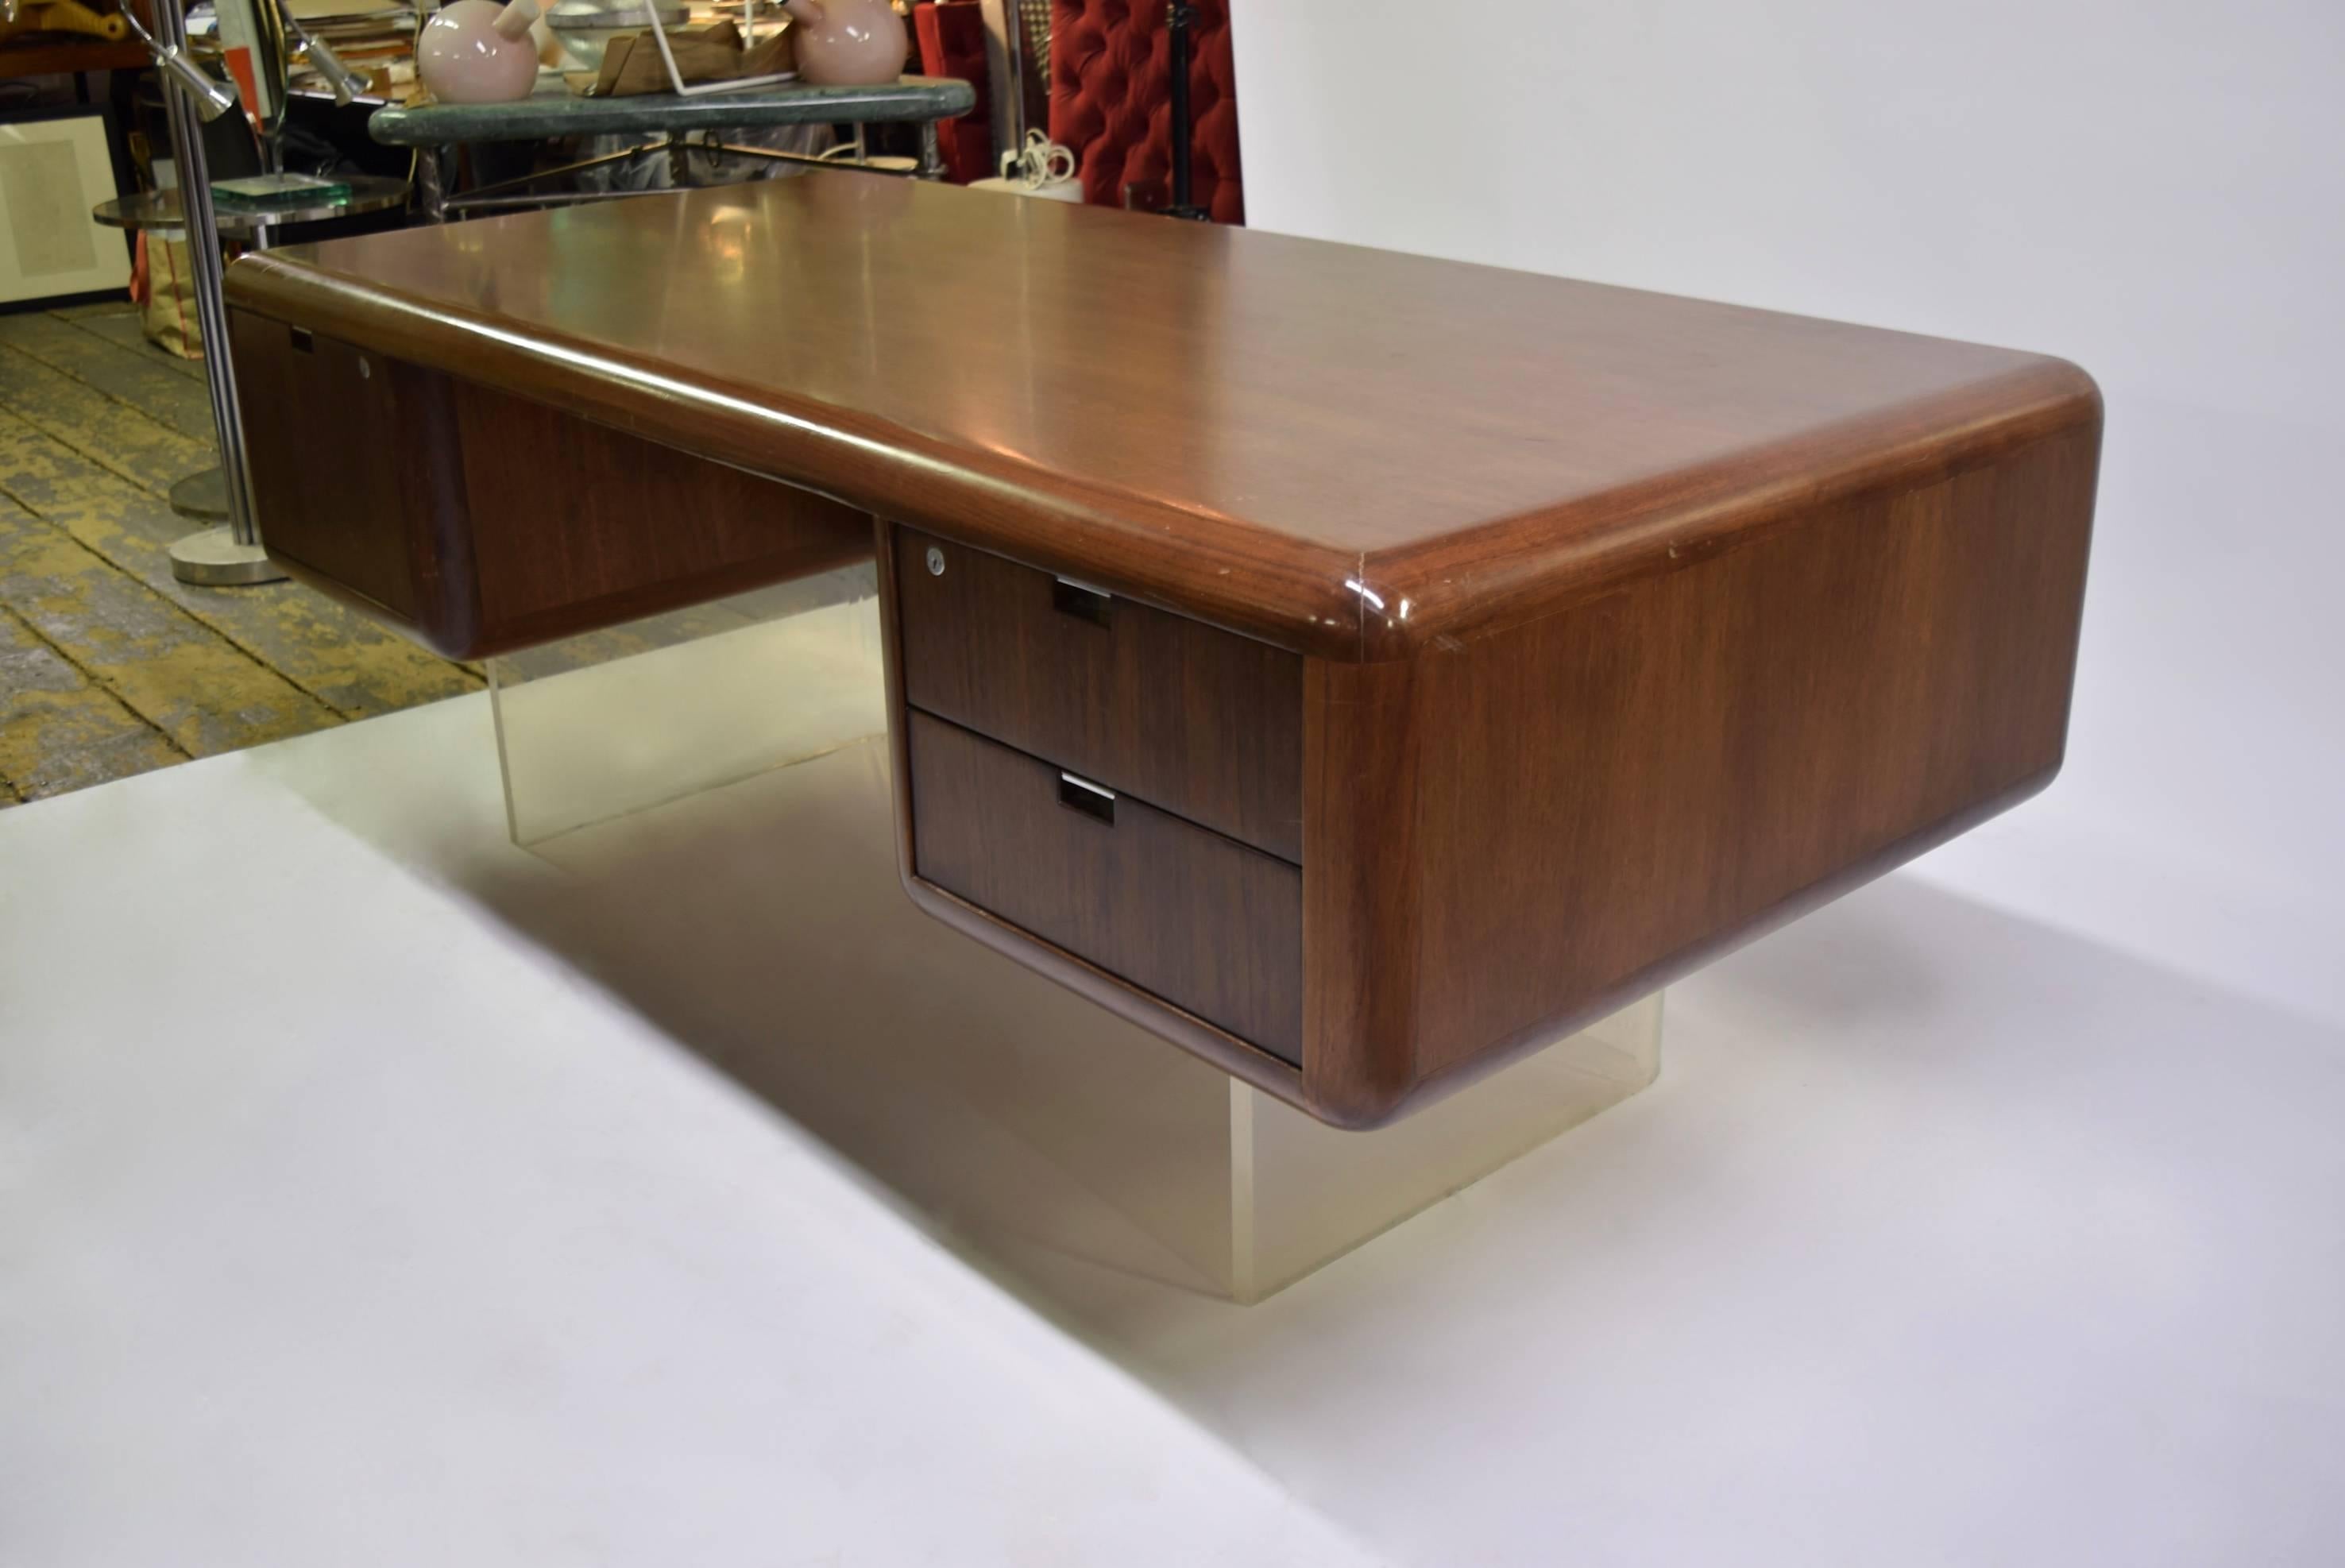 A floating desk in solid walnut with smooth round edges supported by a clear Lucite base designed in the 1960s by Vladimir Kagan.